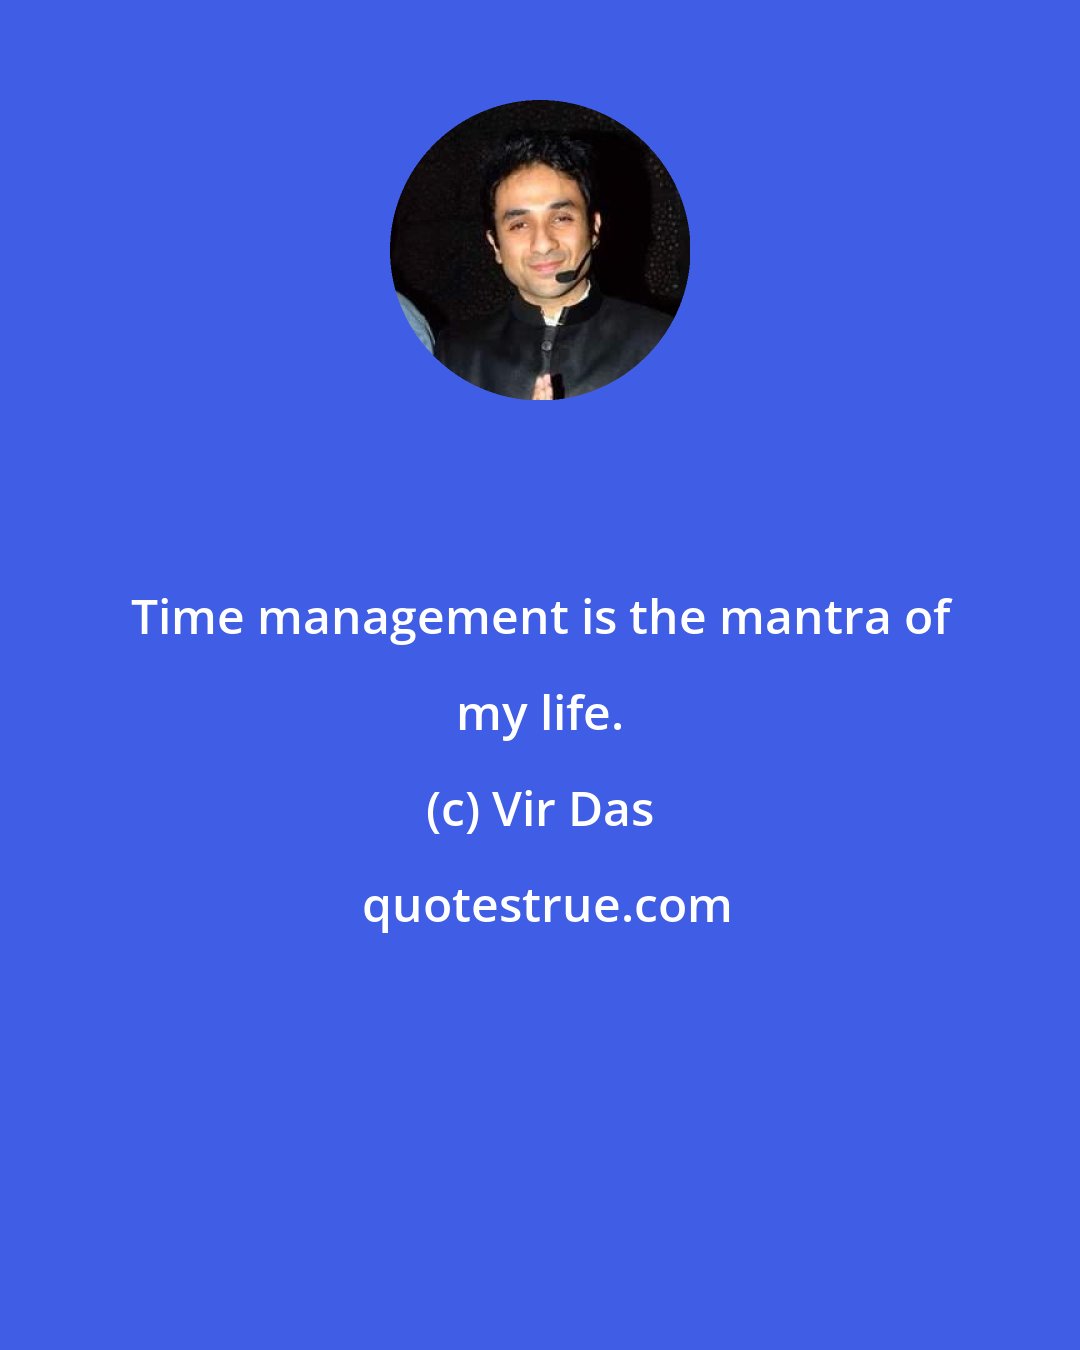 Vir Das: Time management is the mantra of my life.